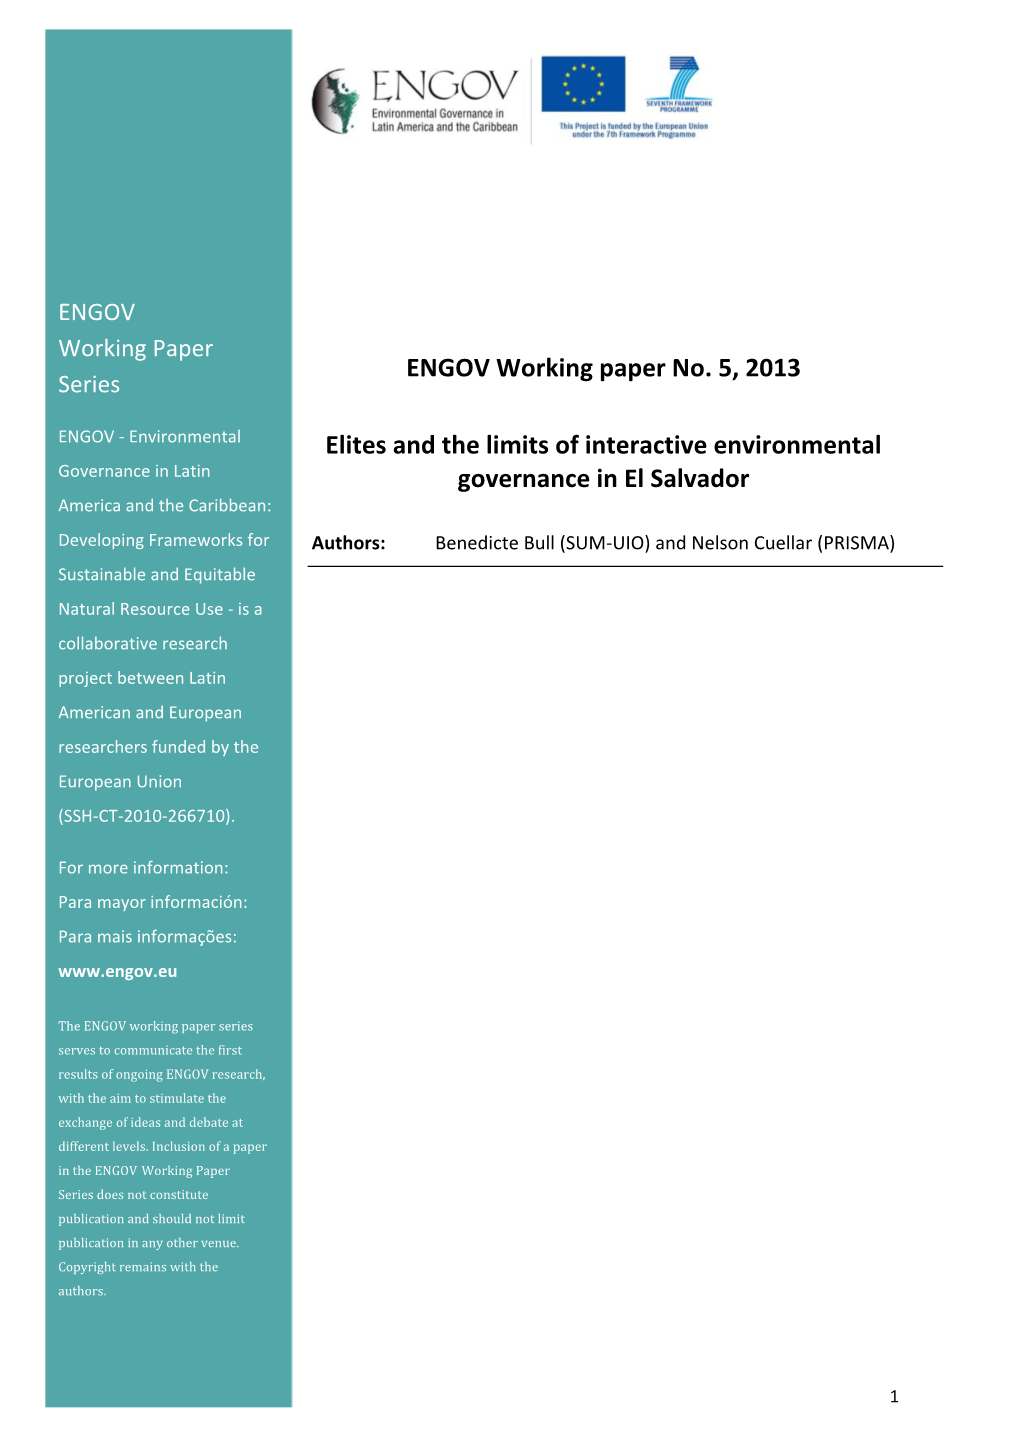 ENGOV Working Paper No. 5, 2013 Elites and the Limits of Interactive Environmental Governance in El Salvador